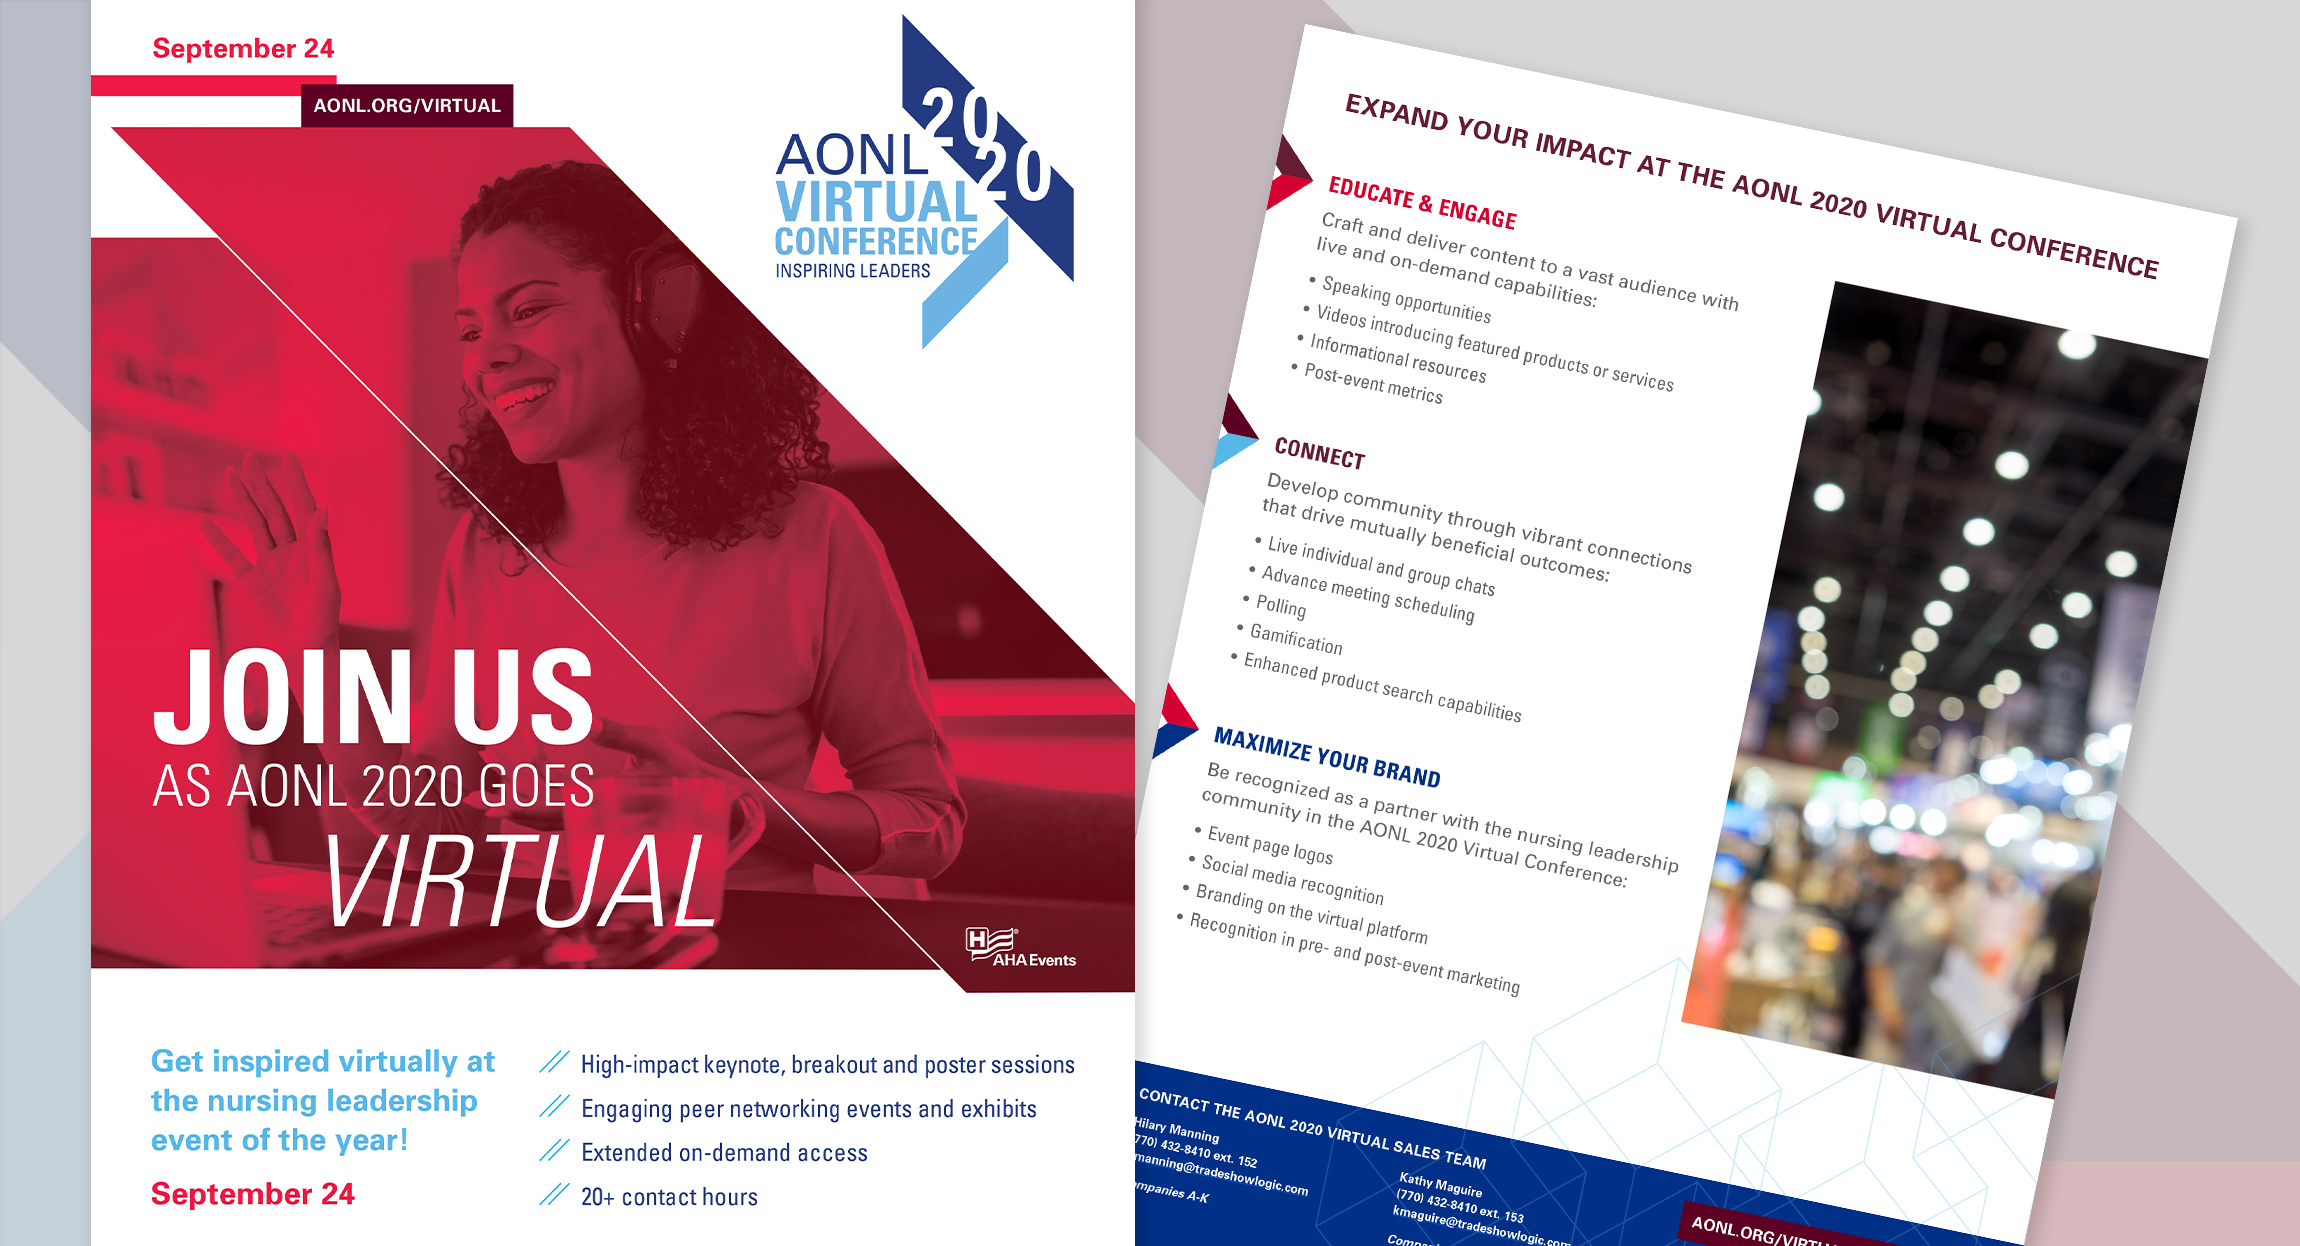 AONL2020 Virtual Conference Branding design by Hughes design|communications